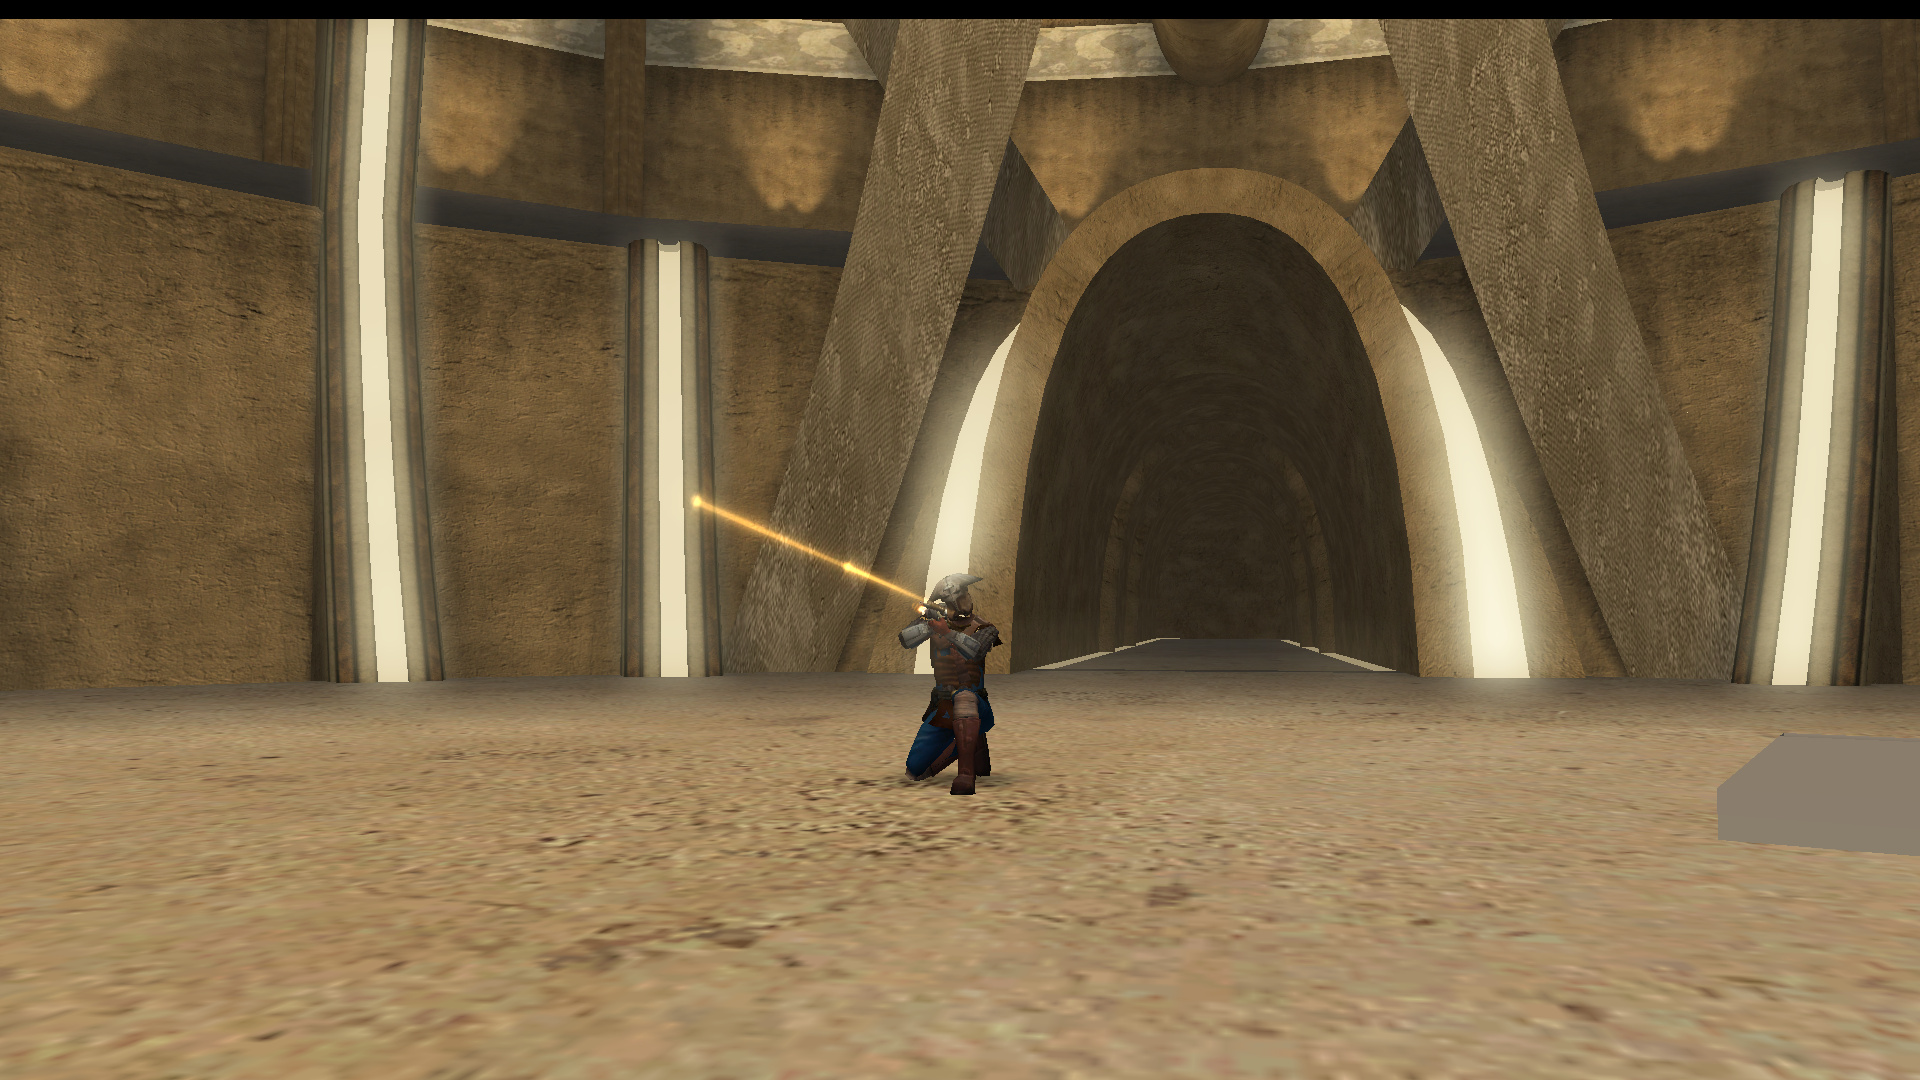 Sniper in the Mos Eisley Arena